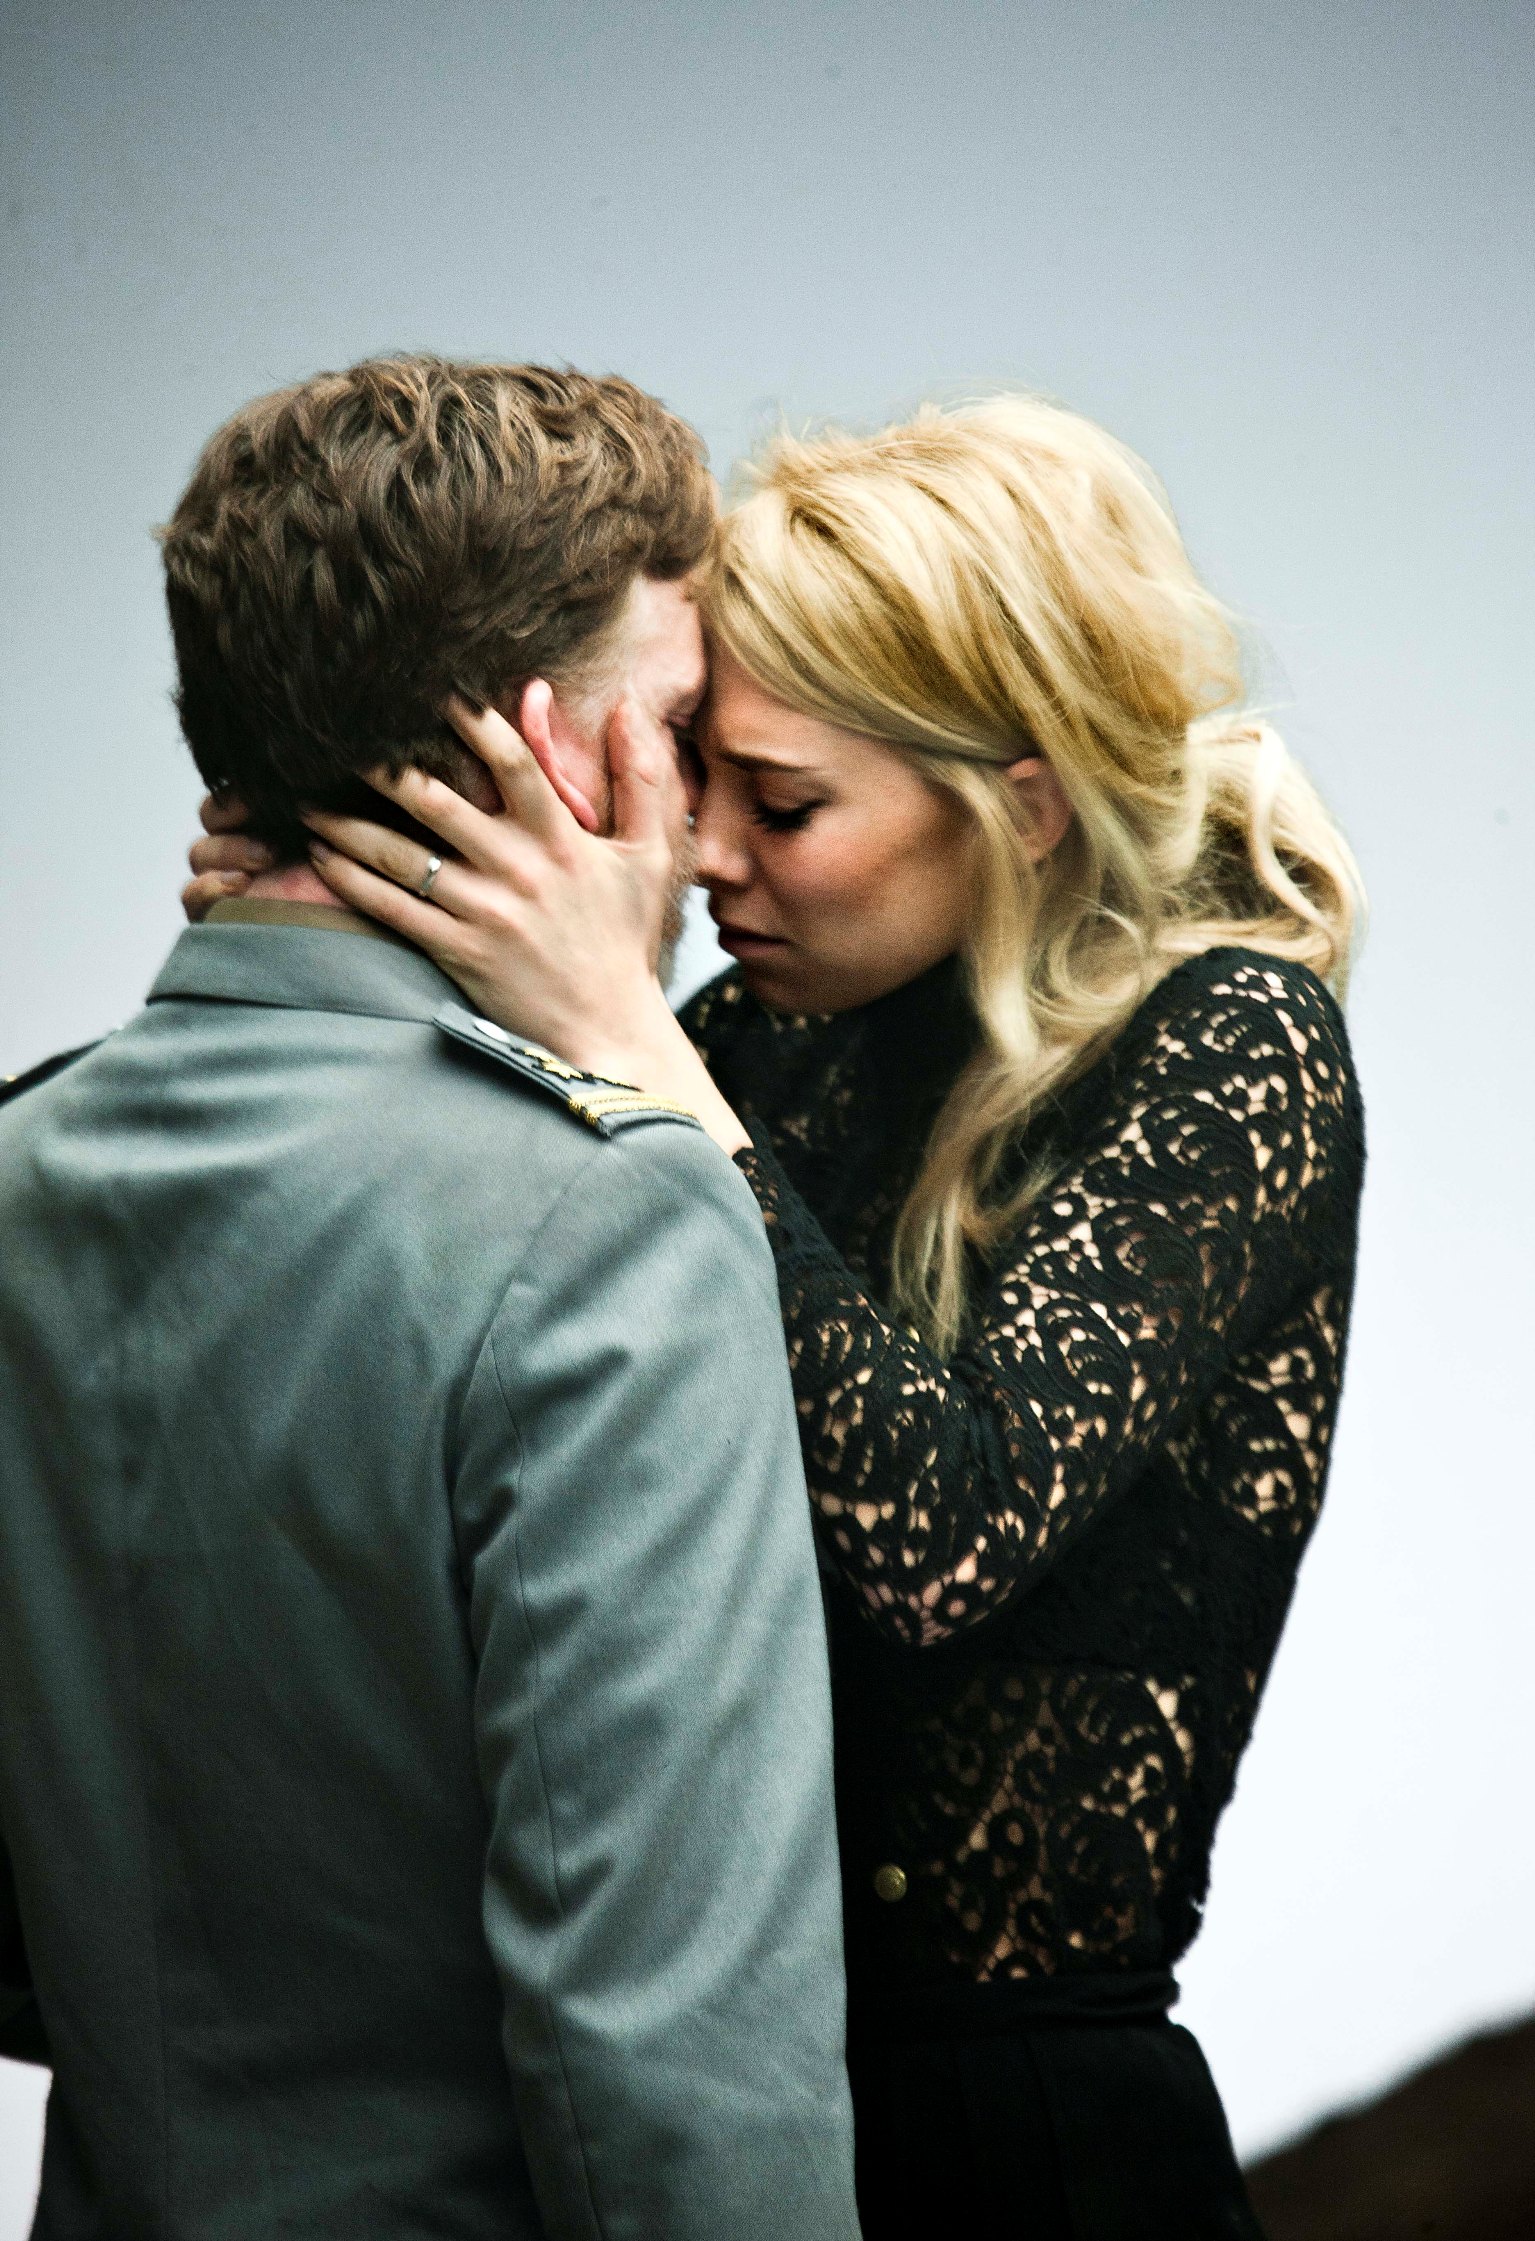 William Houston as Vershinin and Vanessa Kirby as Masha in the Young Vic production of Three Sisters